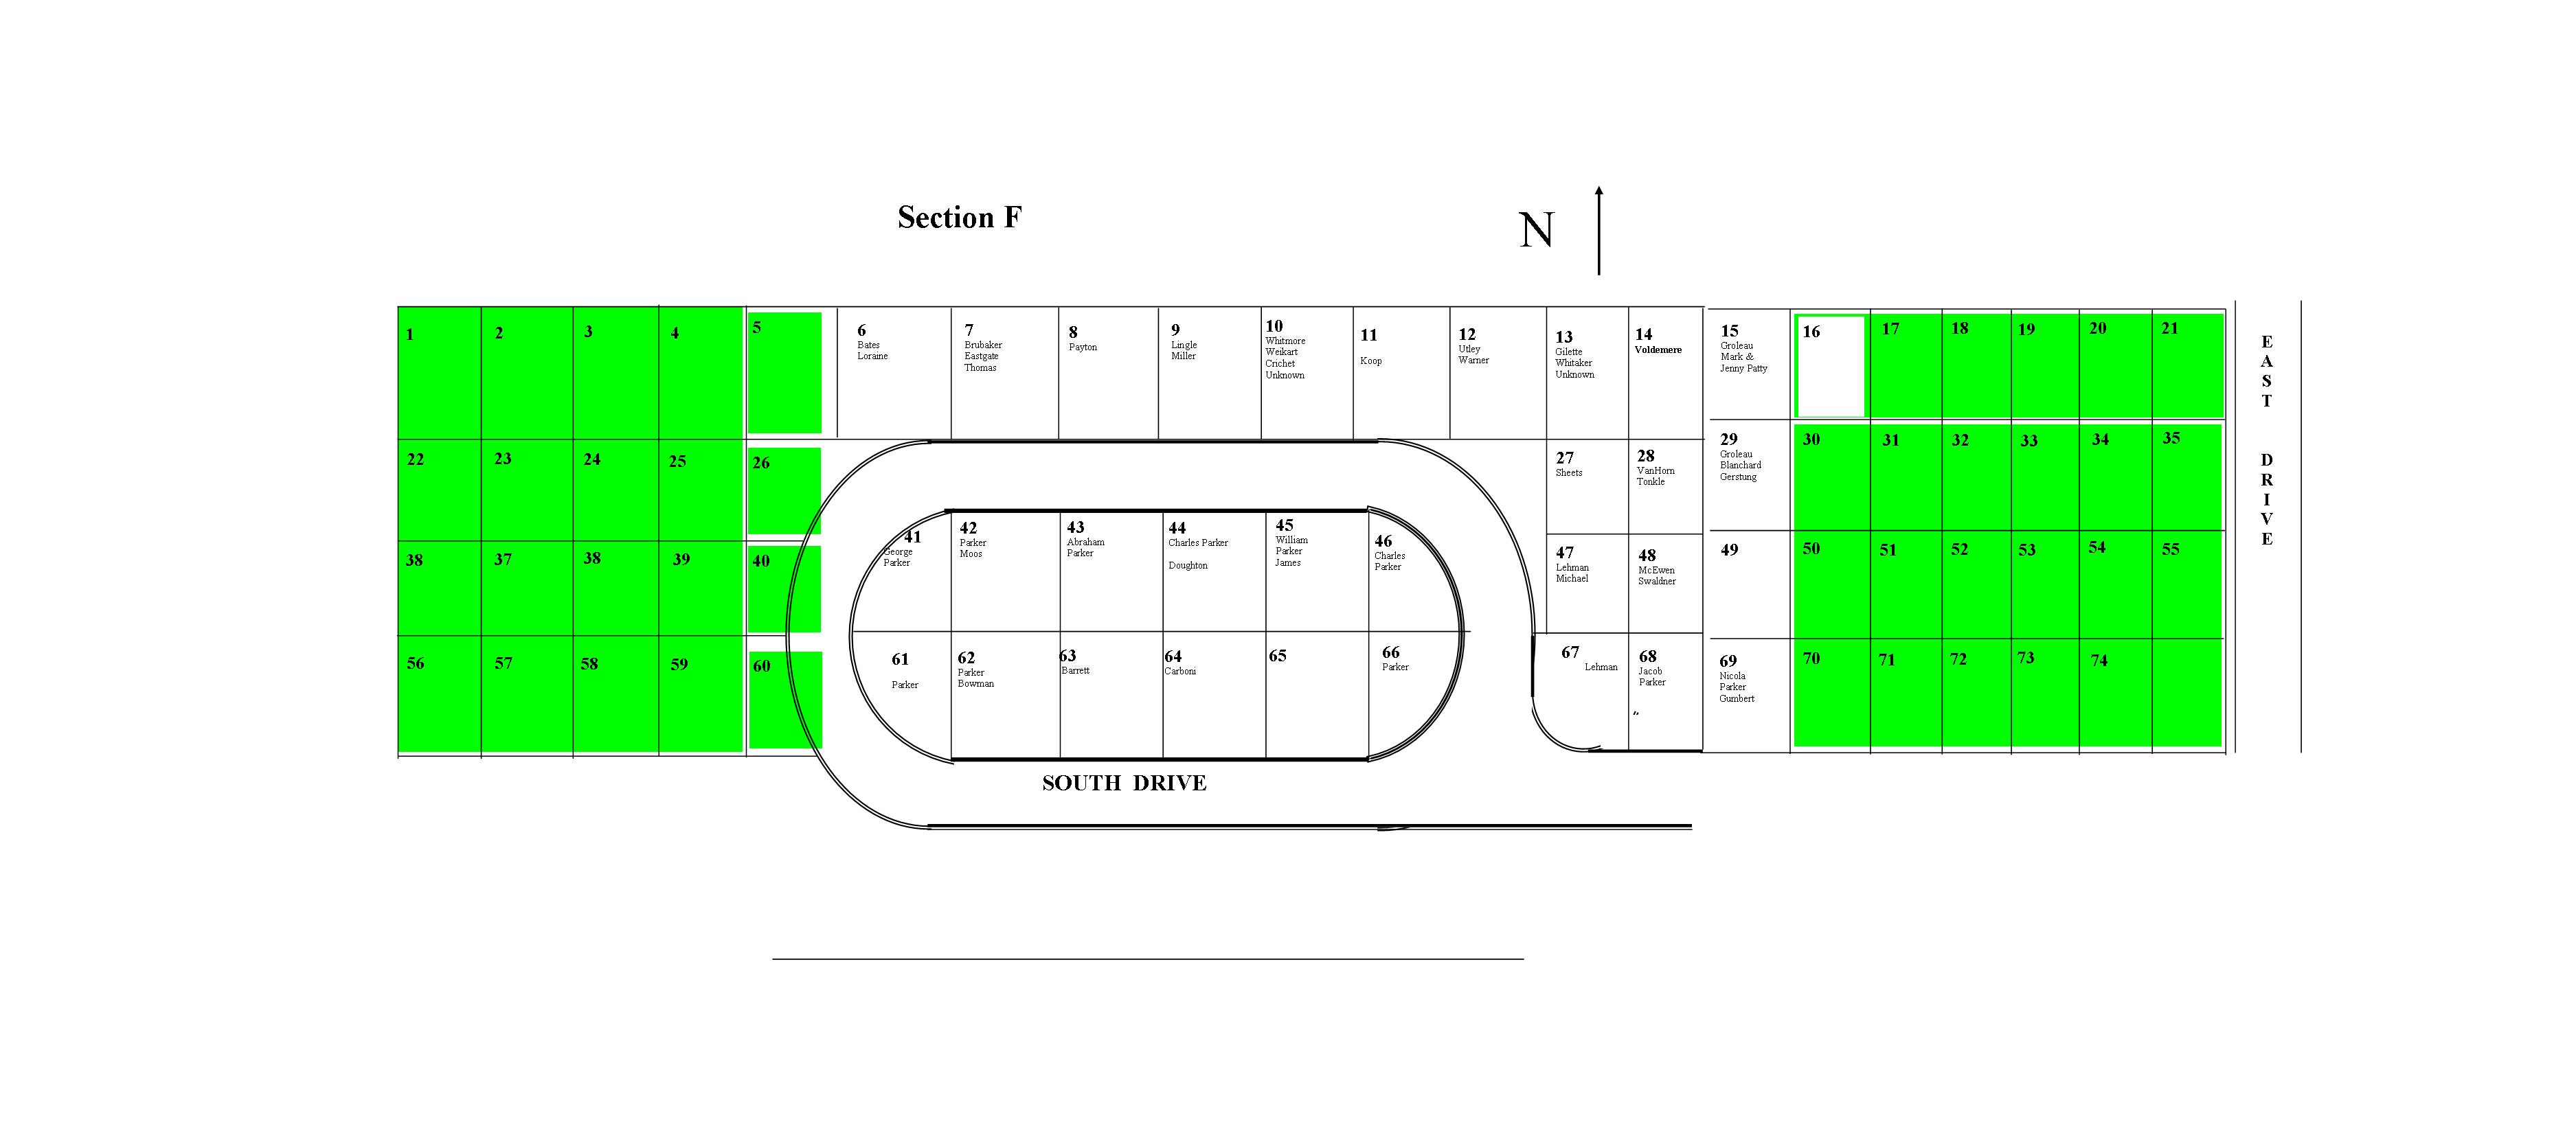 Section F